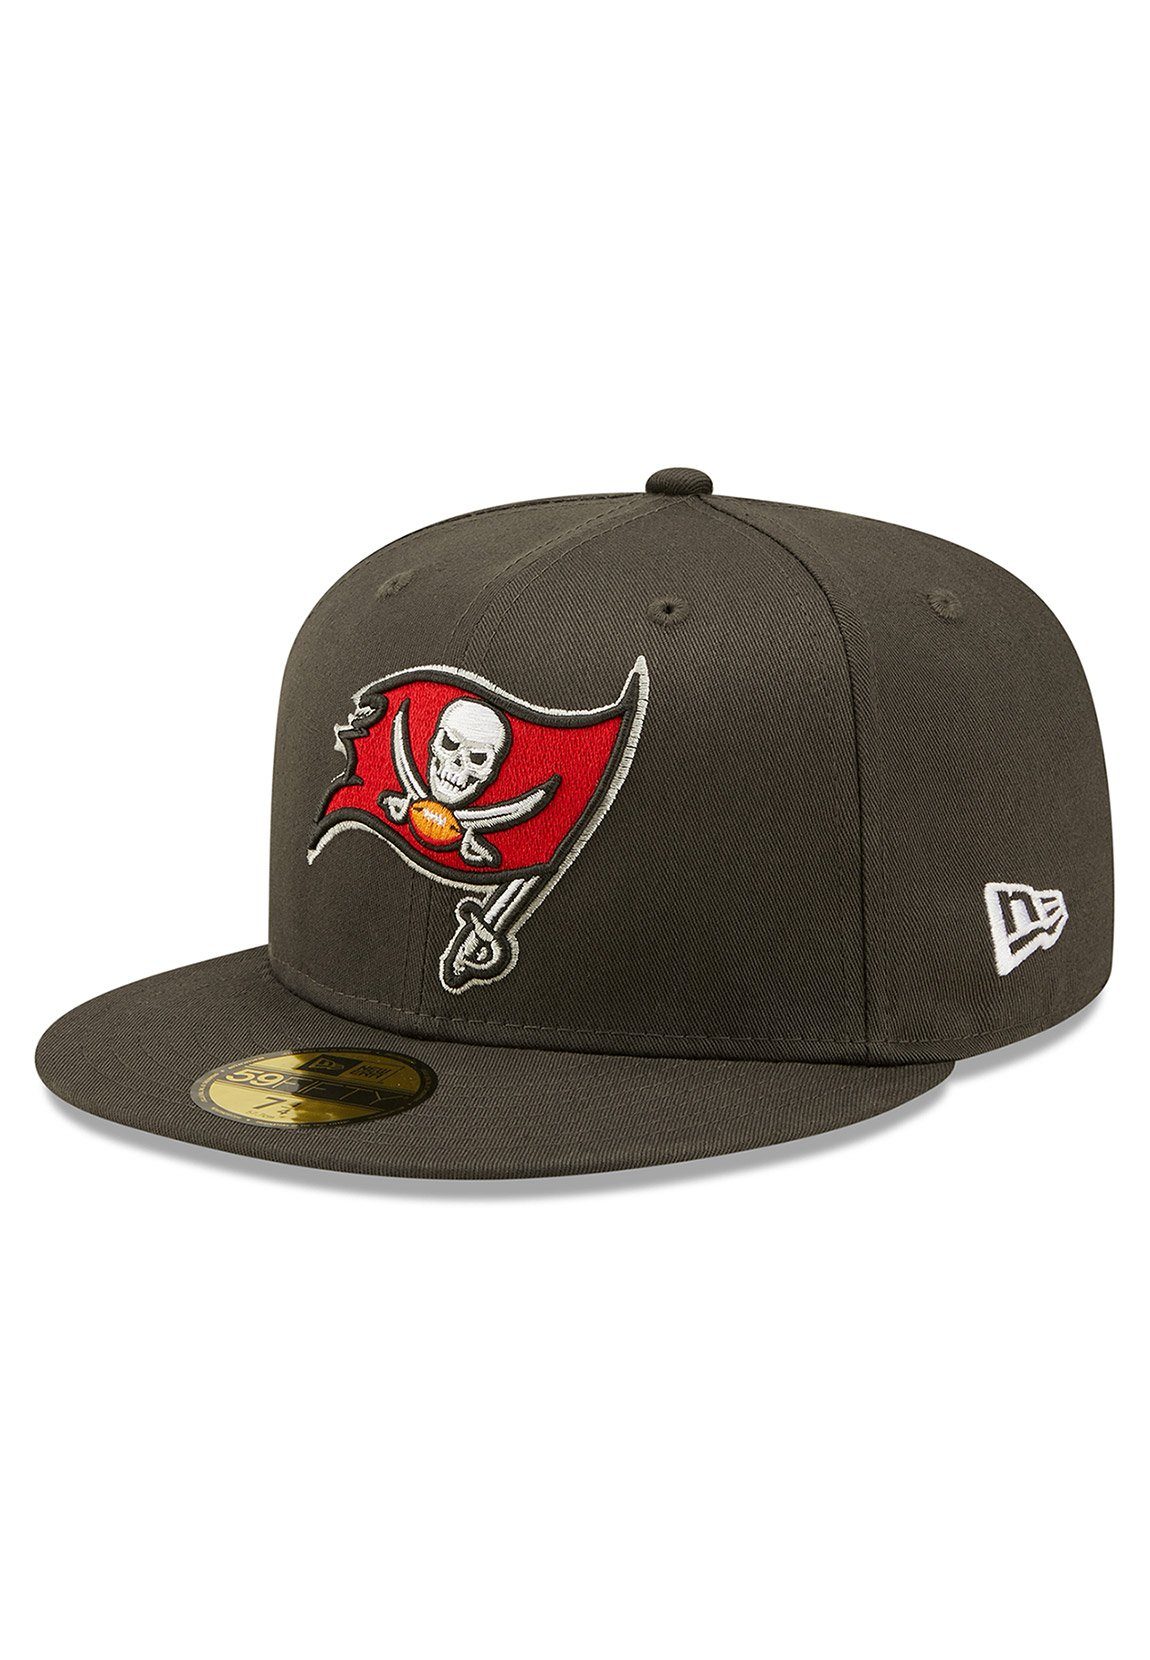 New Era Fitted Cap Side 59Fifty New Grau TAMPA BUCCANEERS BAY Patch Charcoal